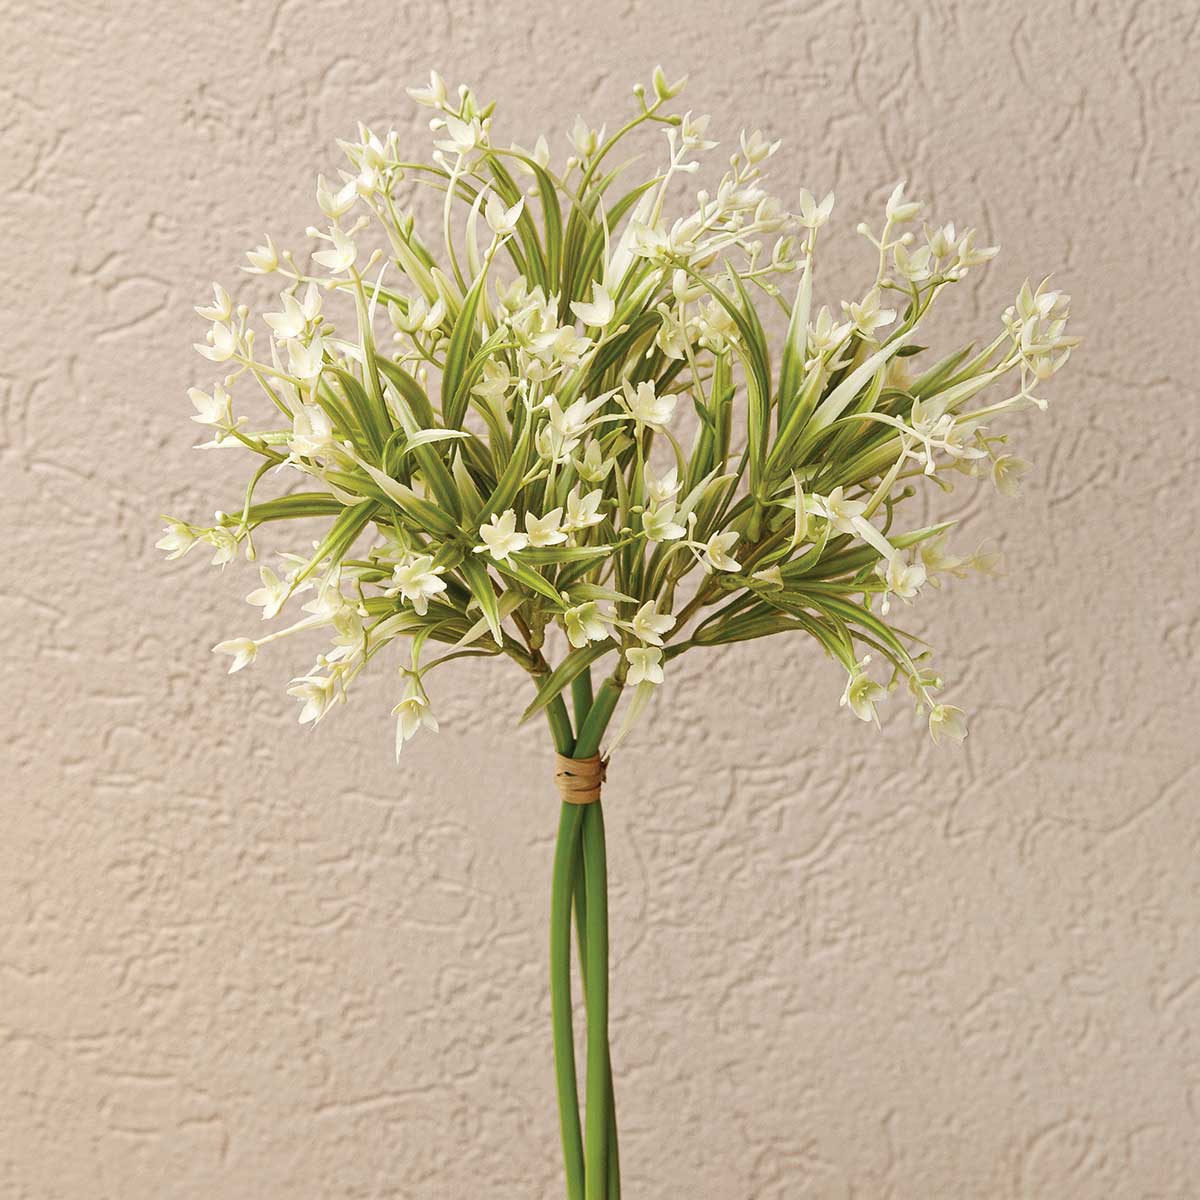 BUNDLE OF 3 FLOWER GRASS WHITE 9IN X 15IN TIED WITH RAFFIA